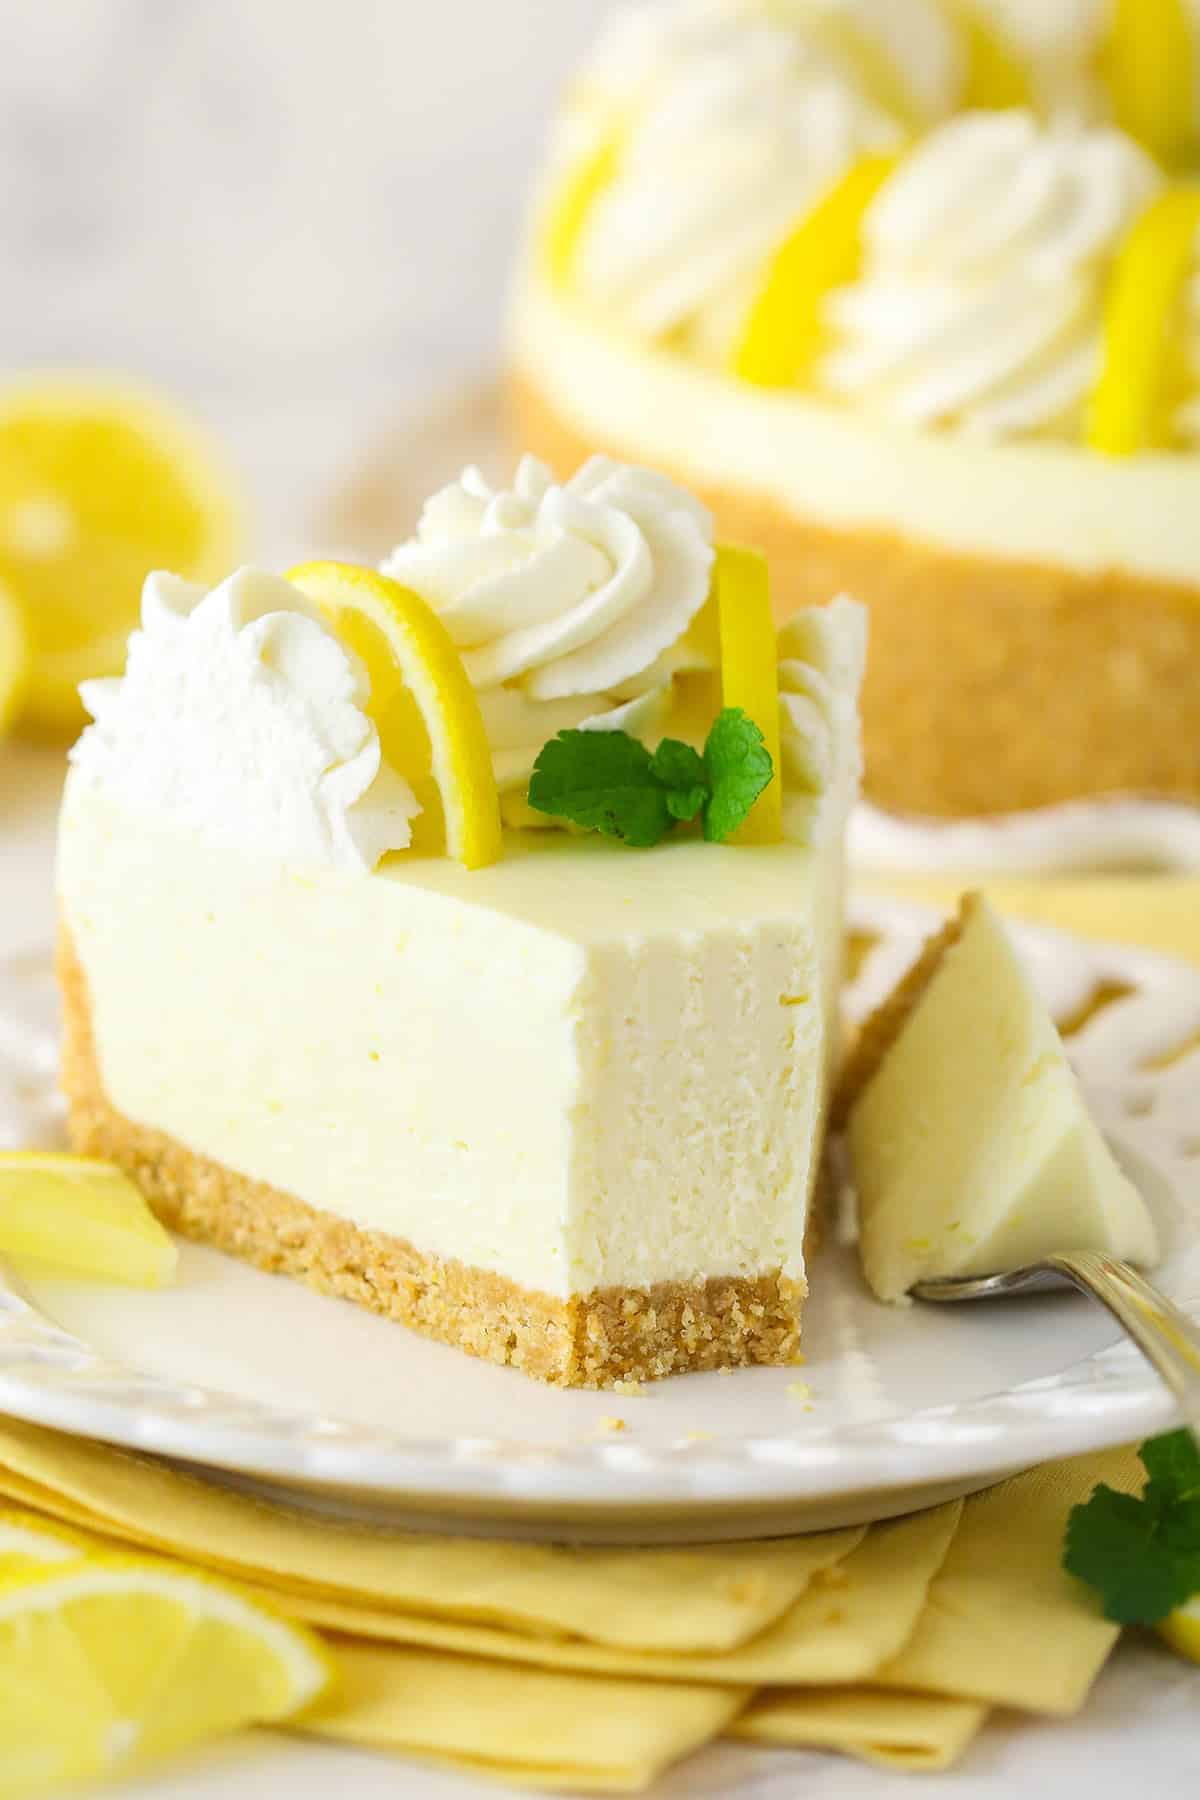 A slice of no bake lemon cheesecake with a bite taken out of it.